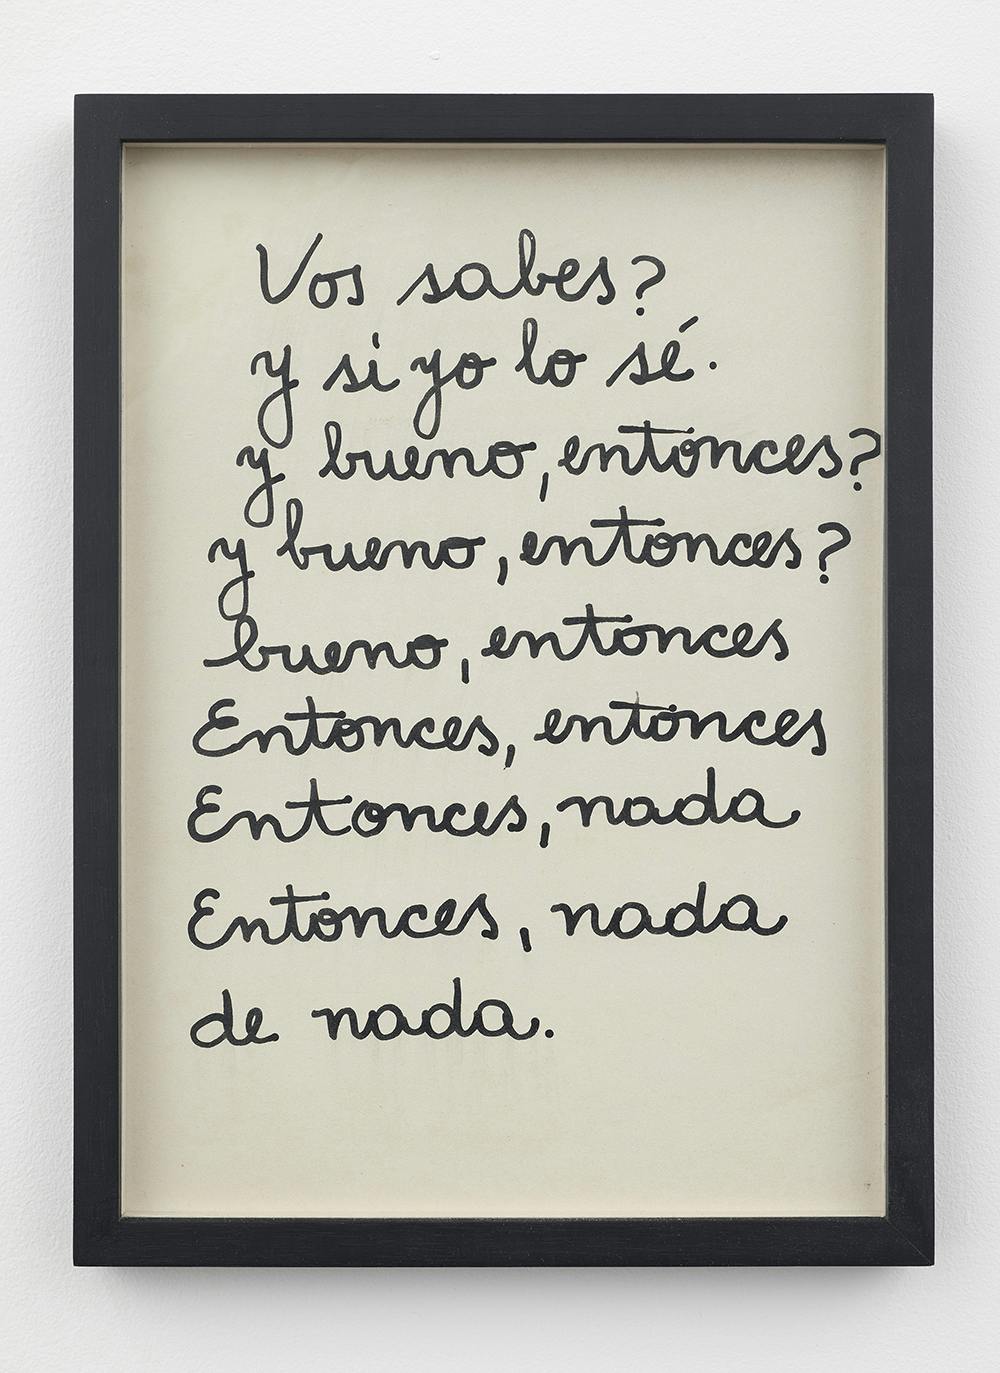 A white page with black cursive text is mounted mounted in a black frame and hung on a white wall. The text reads, "Vos sabes? / Y si yo lo sé. / Y bueno, entonces? / Y bueno, entonces? / bueno, entonces / Entonces, entonces / Entonces, nada / Entonces, nada / de nada." (In English the text translates to, “You know? / And if I know. / And well, then? / And well, then? / Well, then / Then, then / Then, nothing / Then, nothing / you're welcome.")